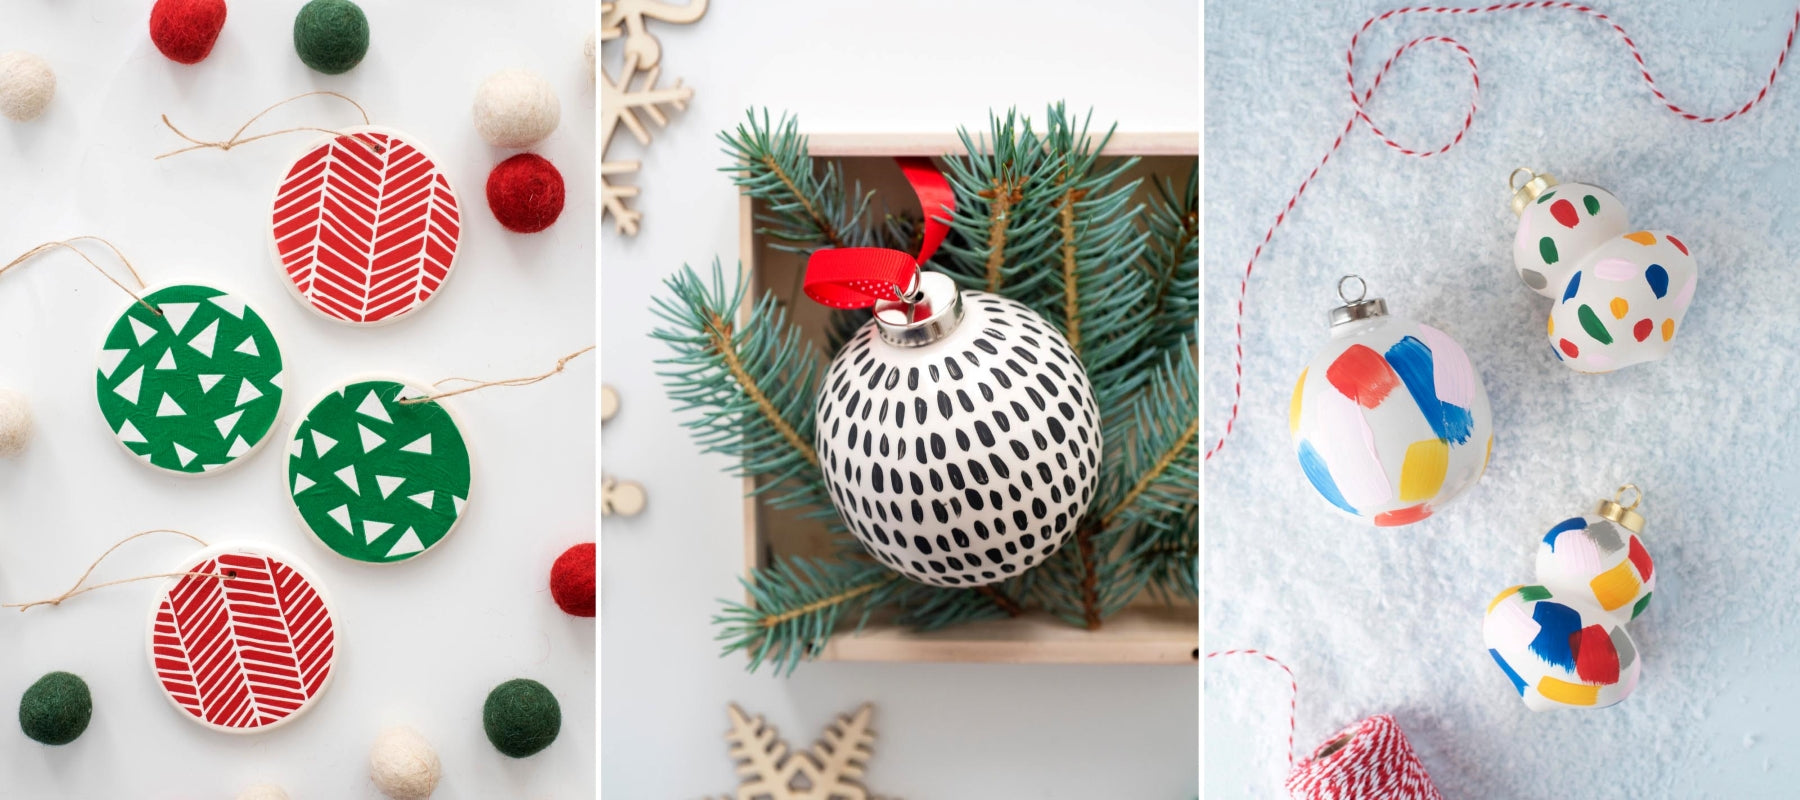 Top 10 Best Ceramic Ornaments To Make Your Christmas Decor